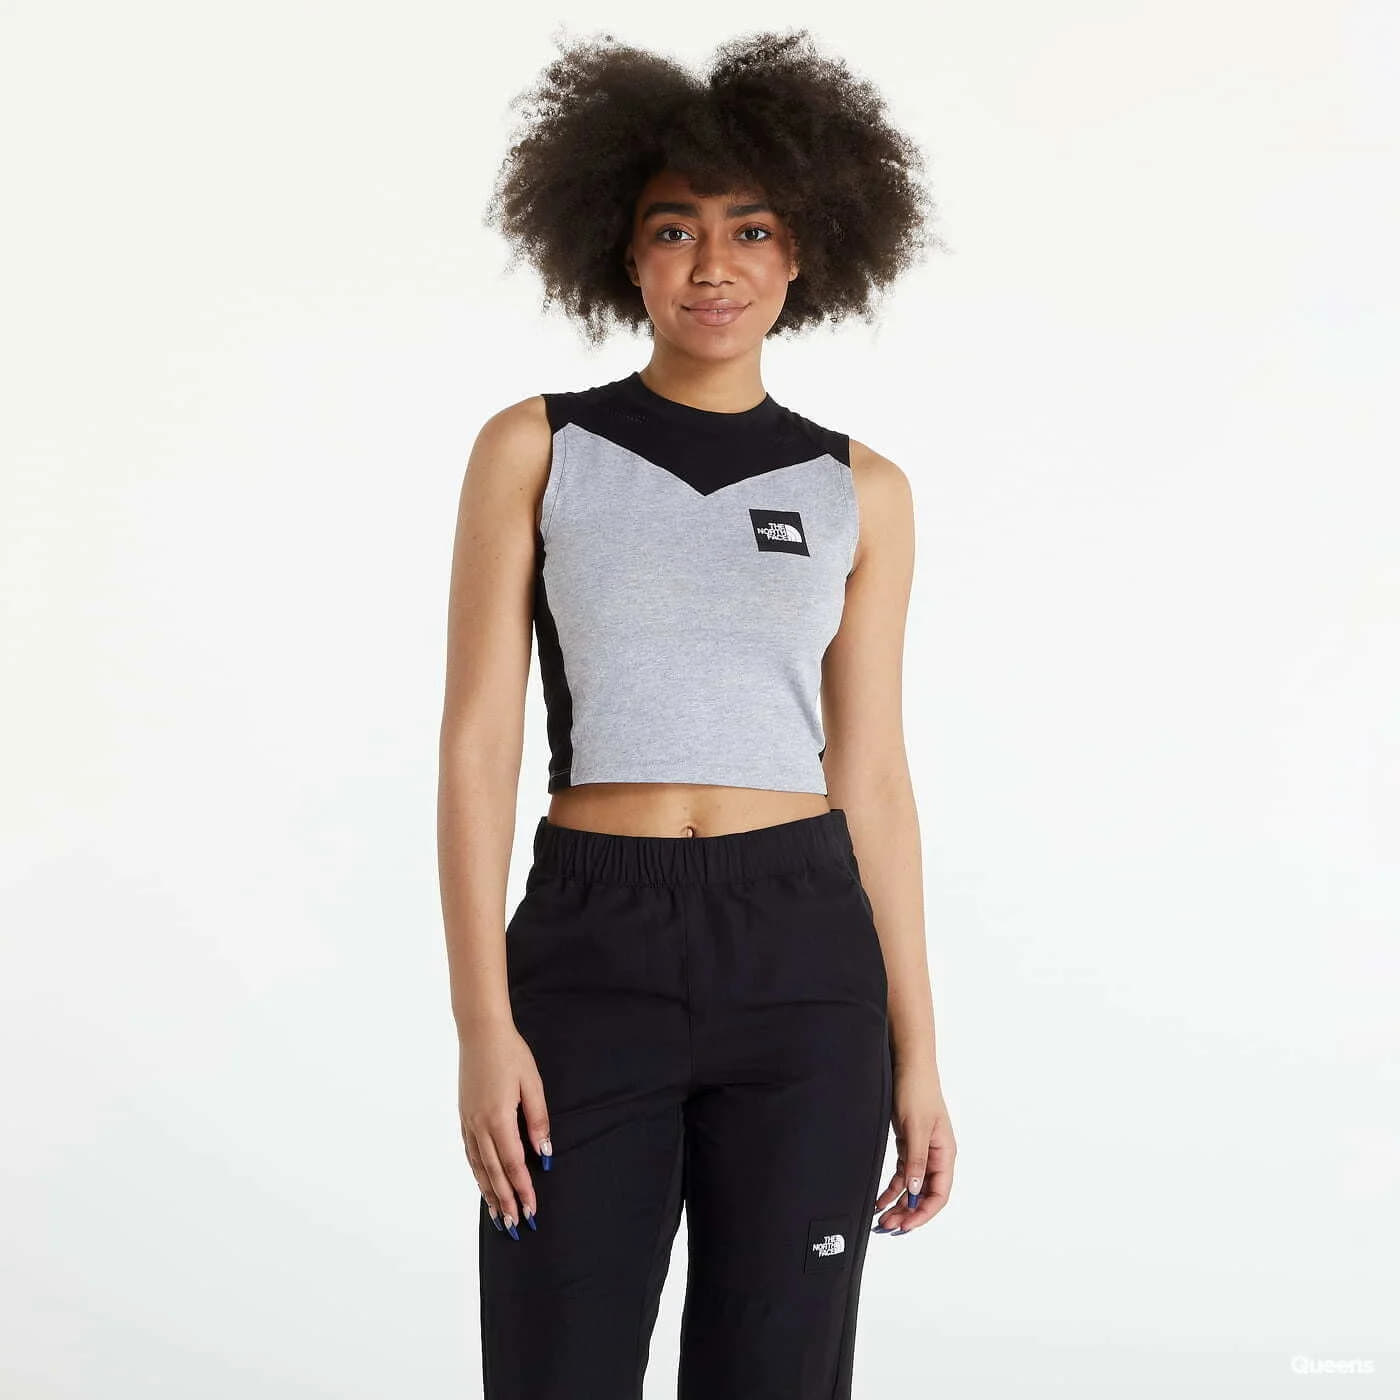 The North Face Cropped Fitted Tank Top Tnf Light Grey Heather